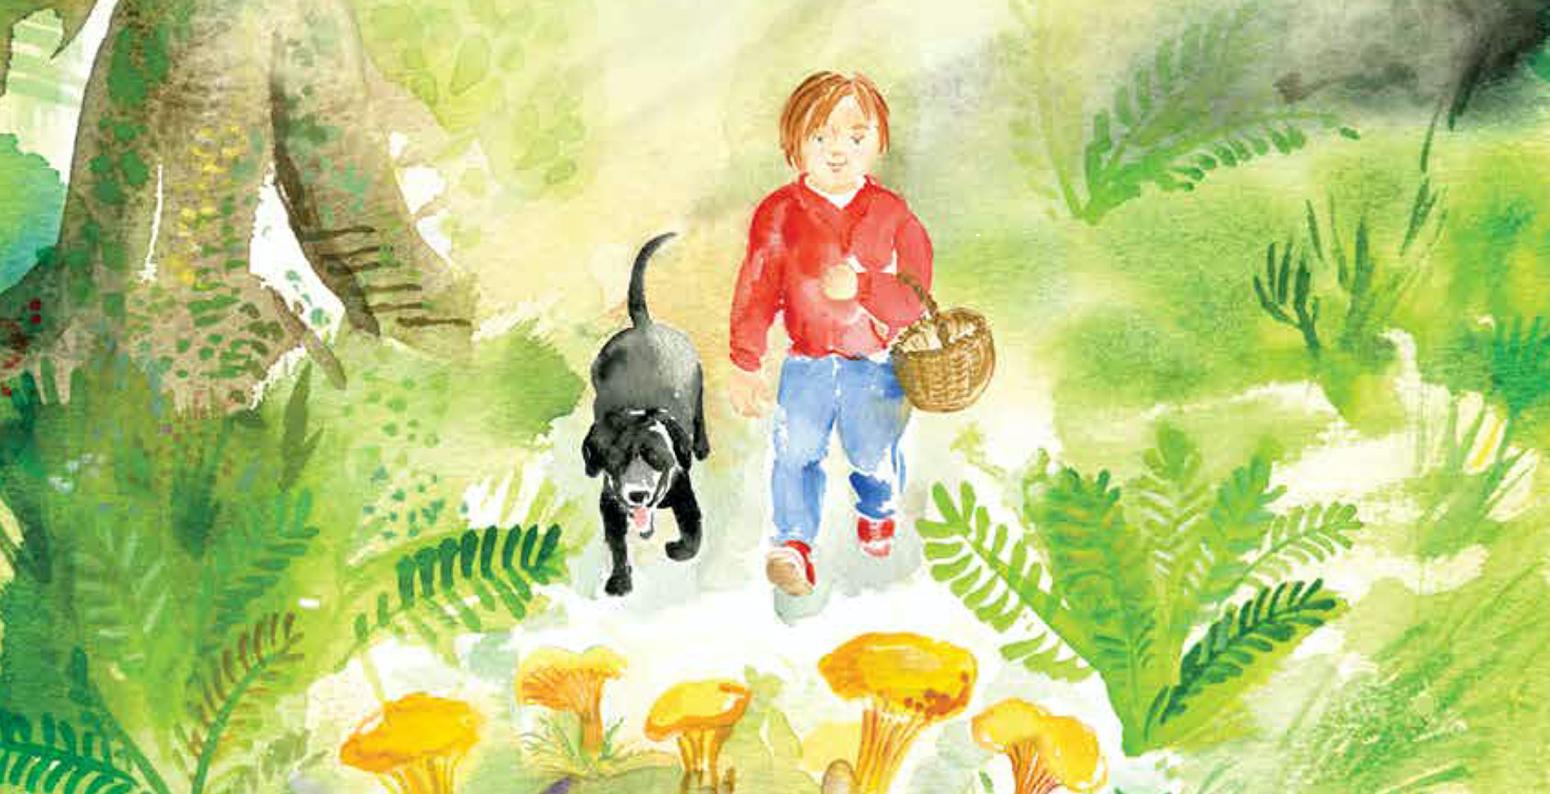 Child and dog walking through trees, with mushrooms on the ground in front of them.